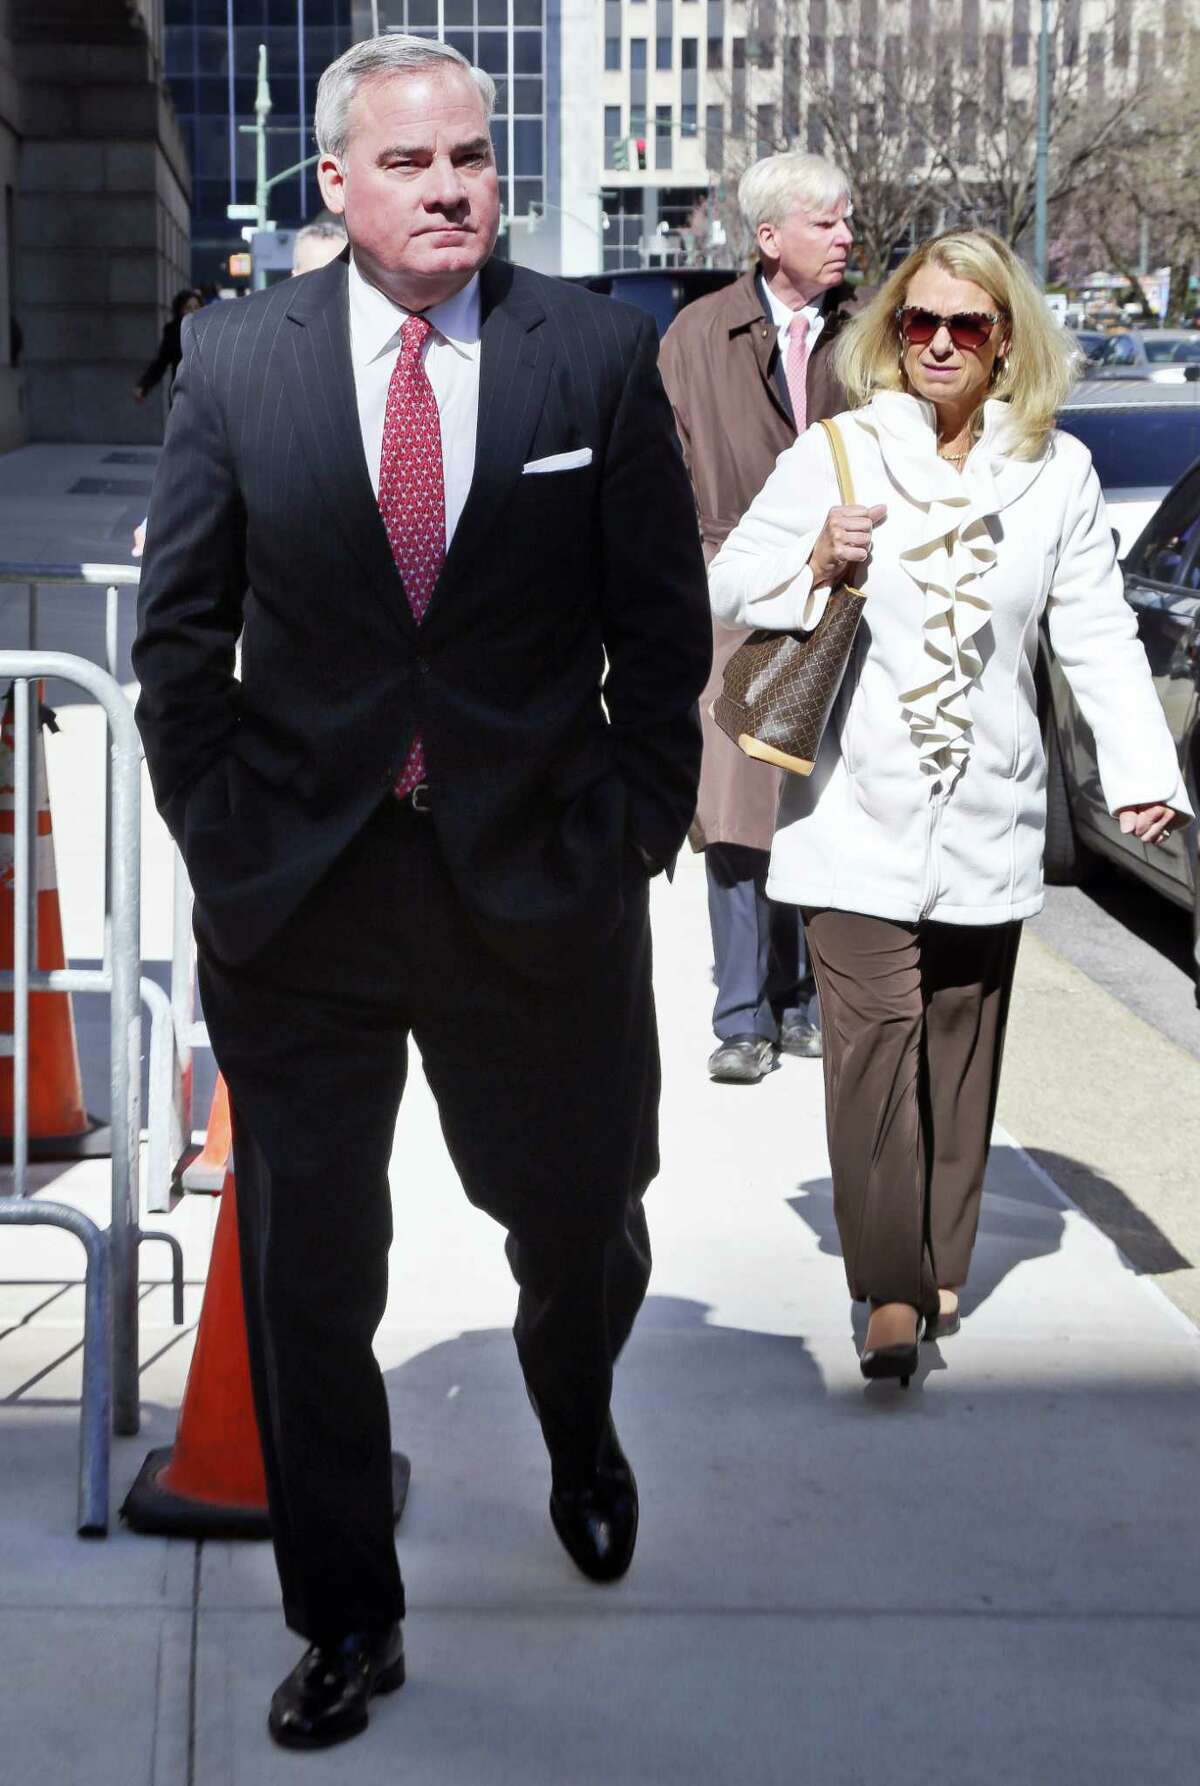 Former Connecticut Gov. John Rowland, left, leaves with his wife Patricia, right, at federal appeals court on Friday, March 18, 2016 in New York. Rowland has asked a federal appeals court to overturn his political corruption conviction.